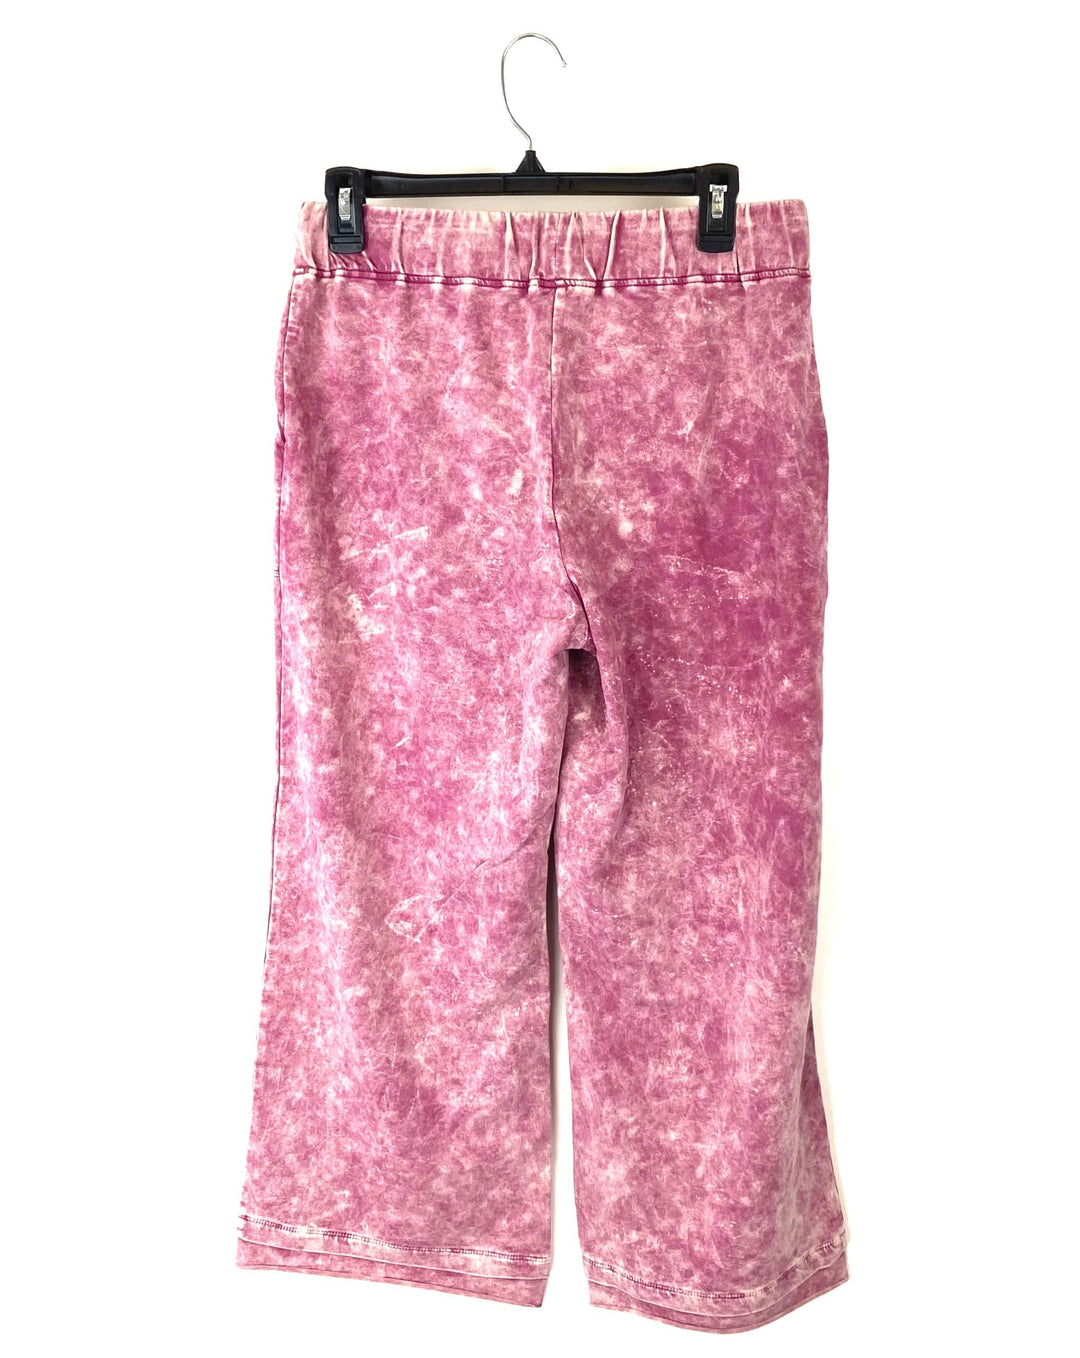 Purple Acid Wash Cropped Stretch Pants - Size 6-8, and Size 1X